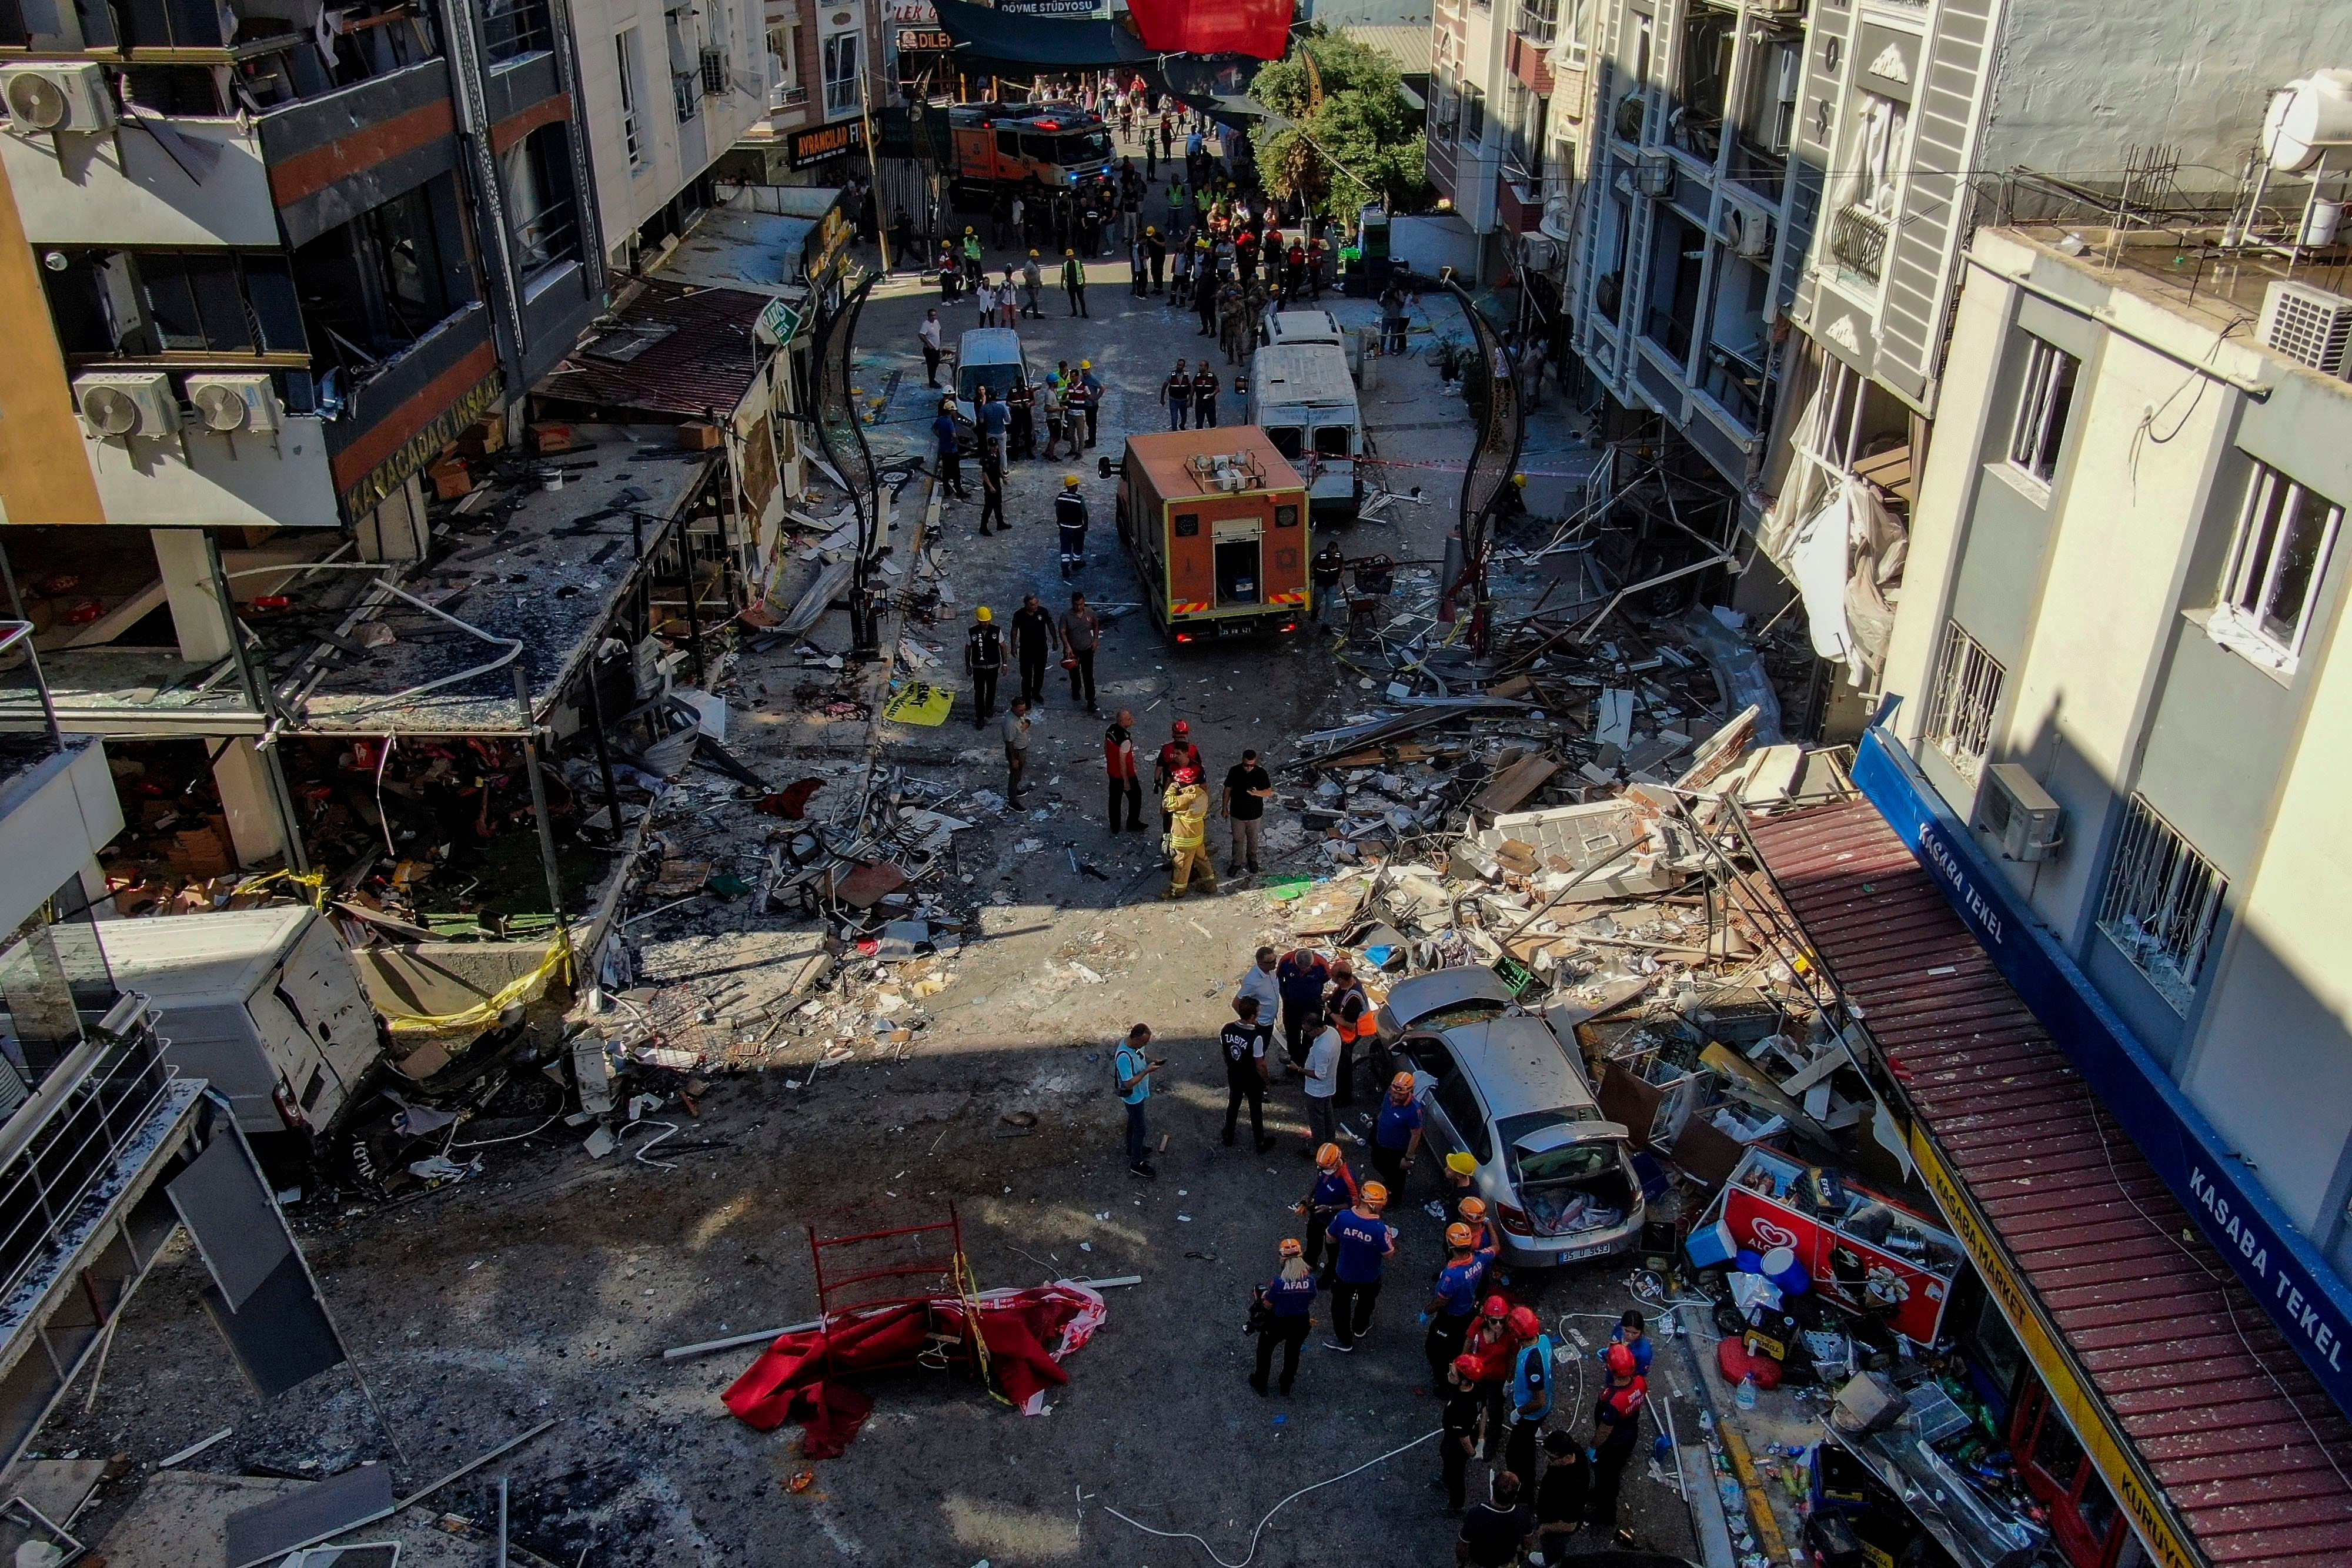 A propane tank explosion in western Turkey has killed 5 people and injured 63 others thumbnail